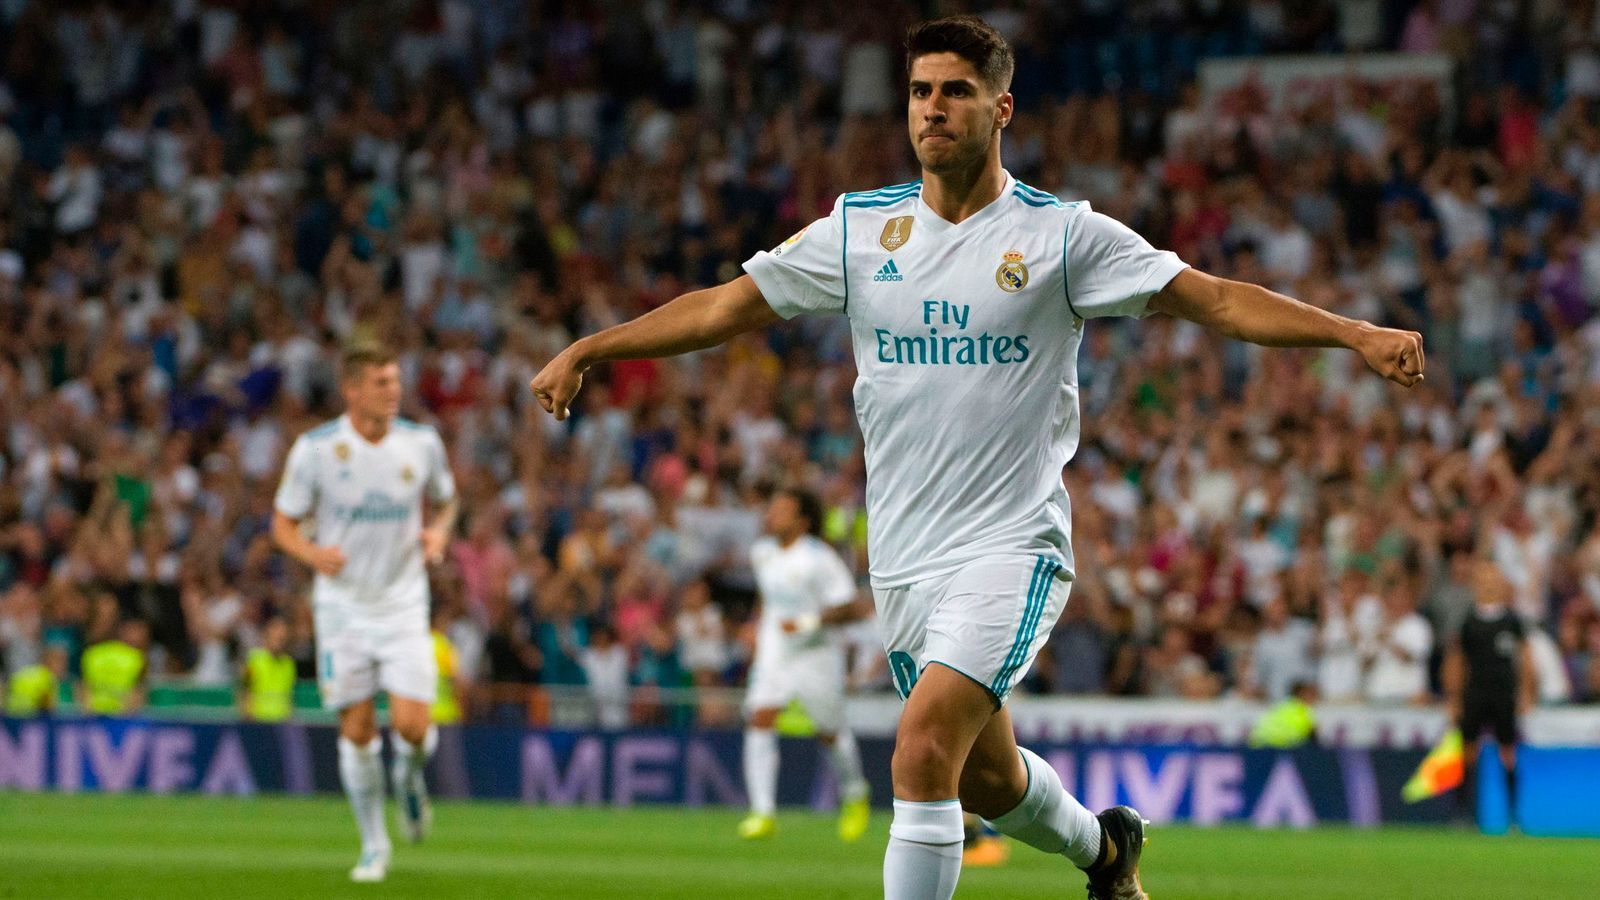 Asensio Returns to Real Madrid in Great Form